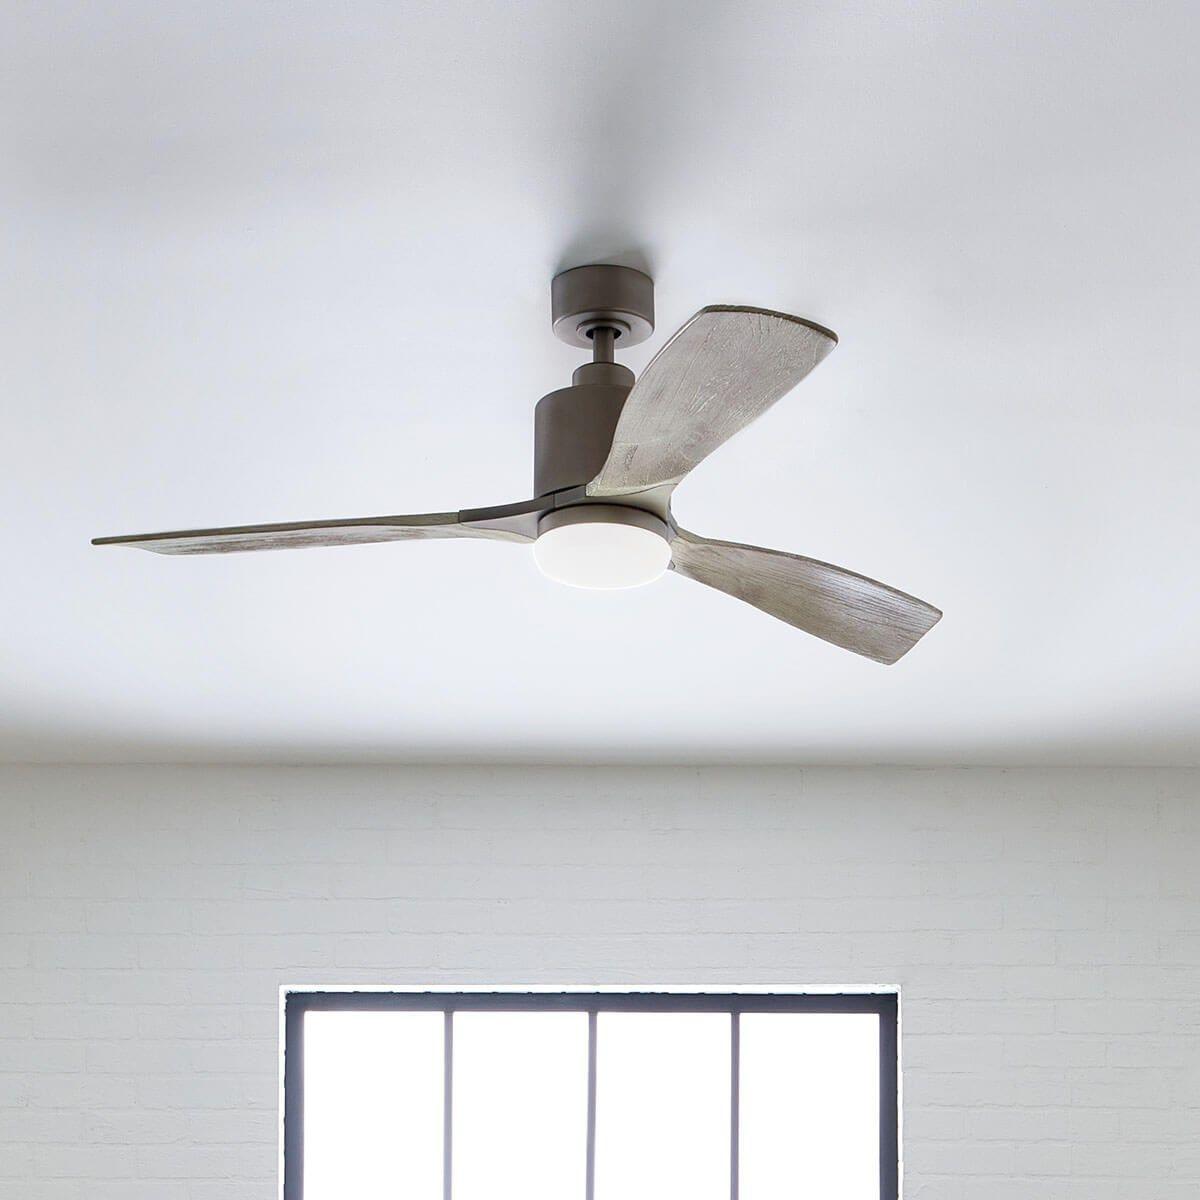 Ridley Ii 52 Inch Propeller Ceiling Fan With Light, Wall Control Included - Bees Lighting